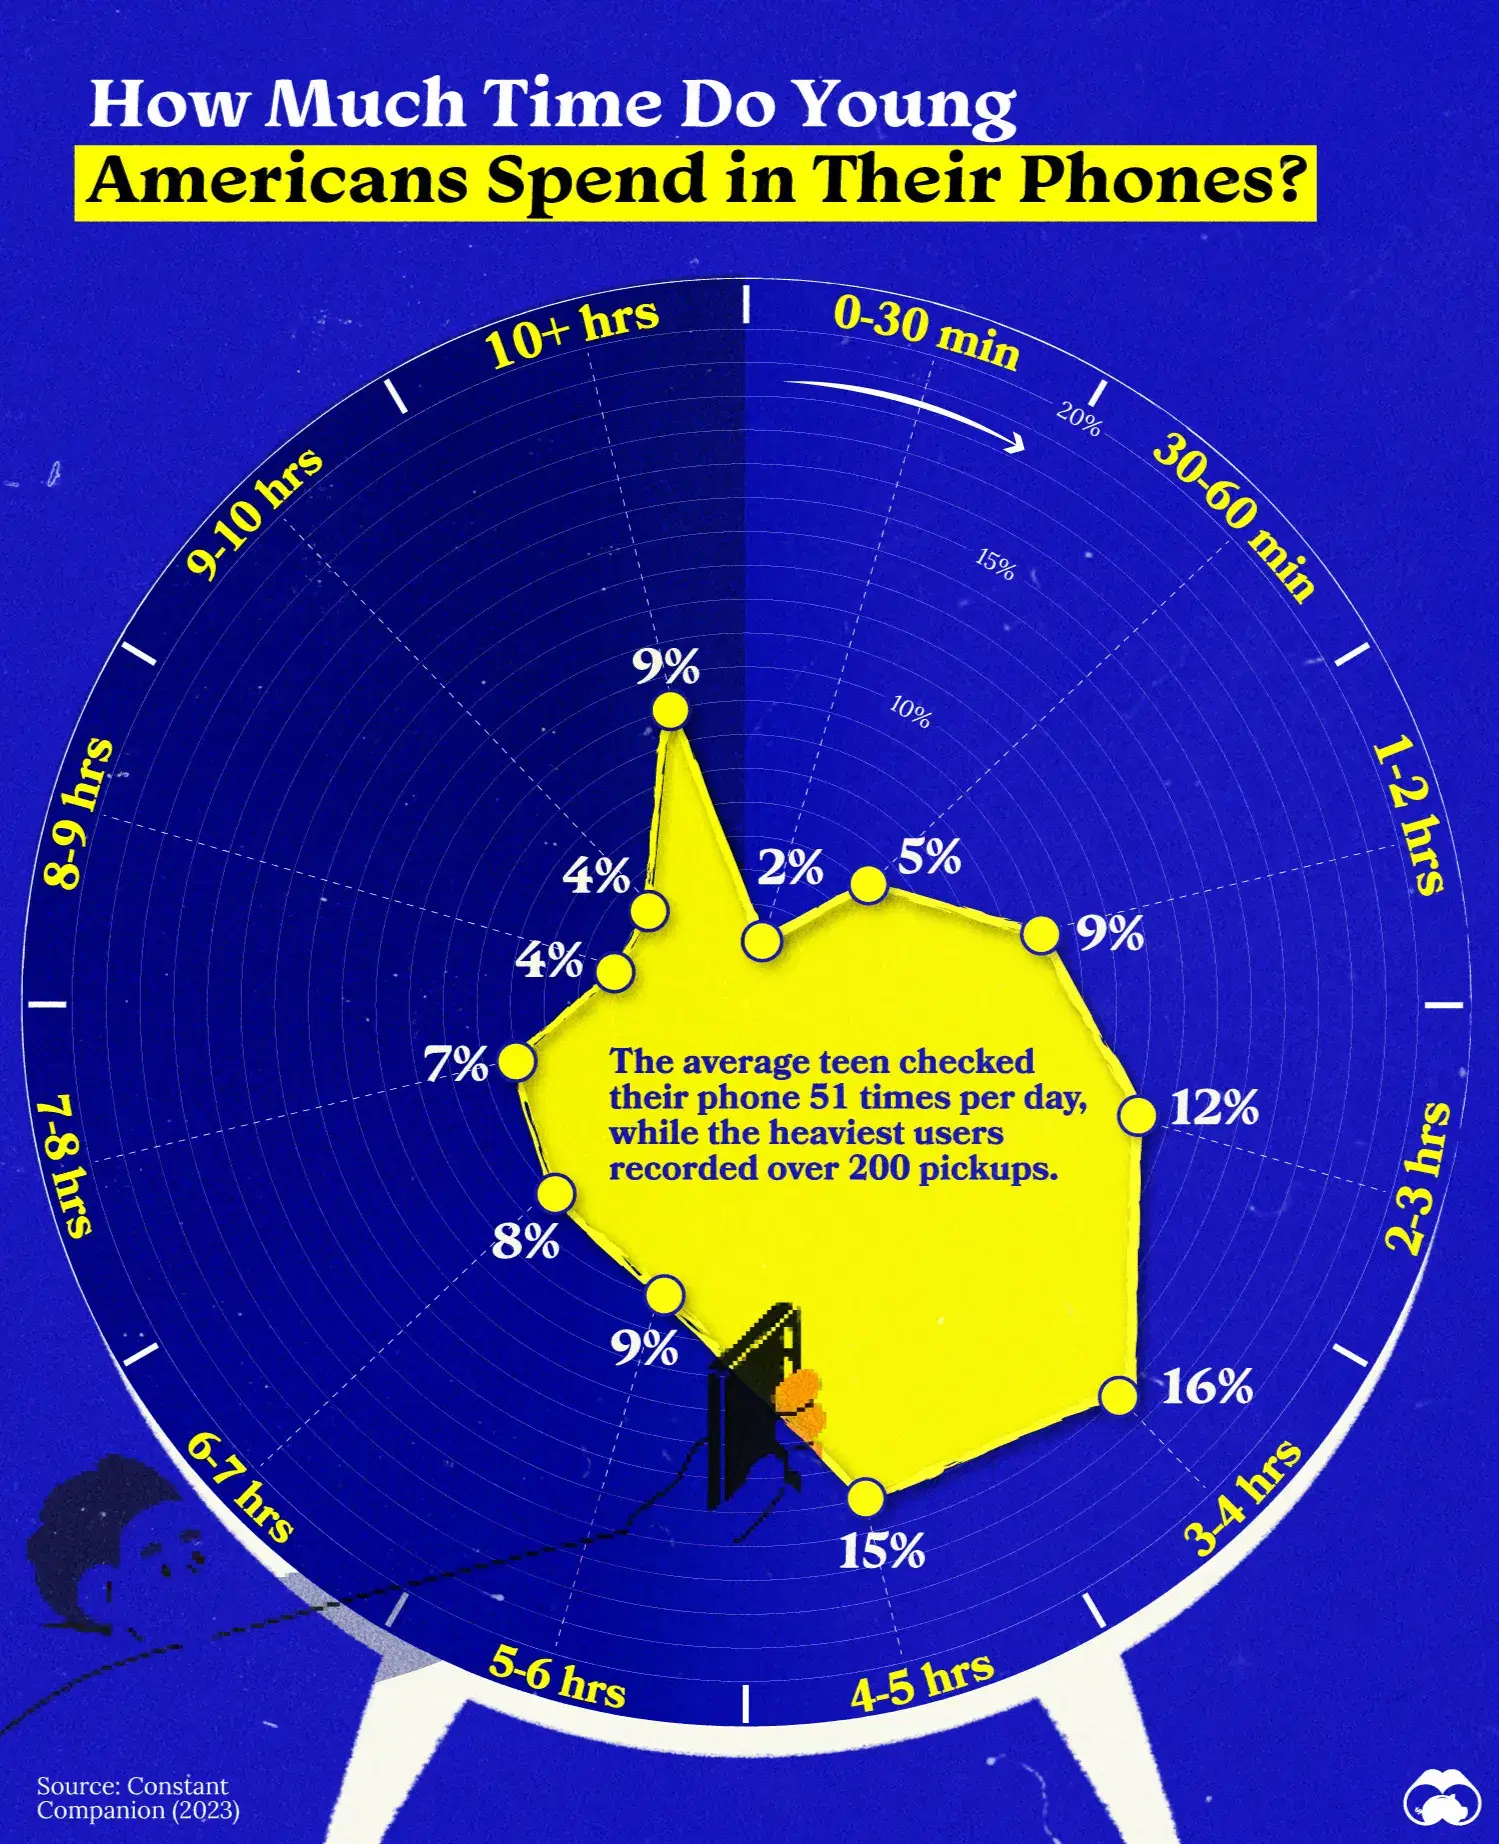 41% Of U.S. Teens Use Their Phones for Over 5 Hours a Day